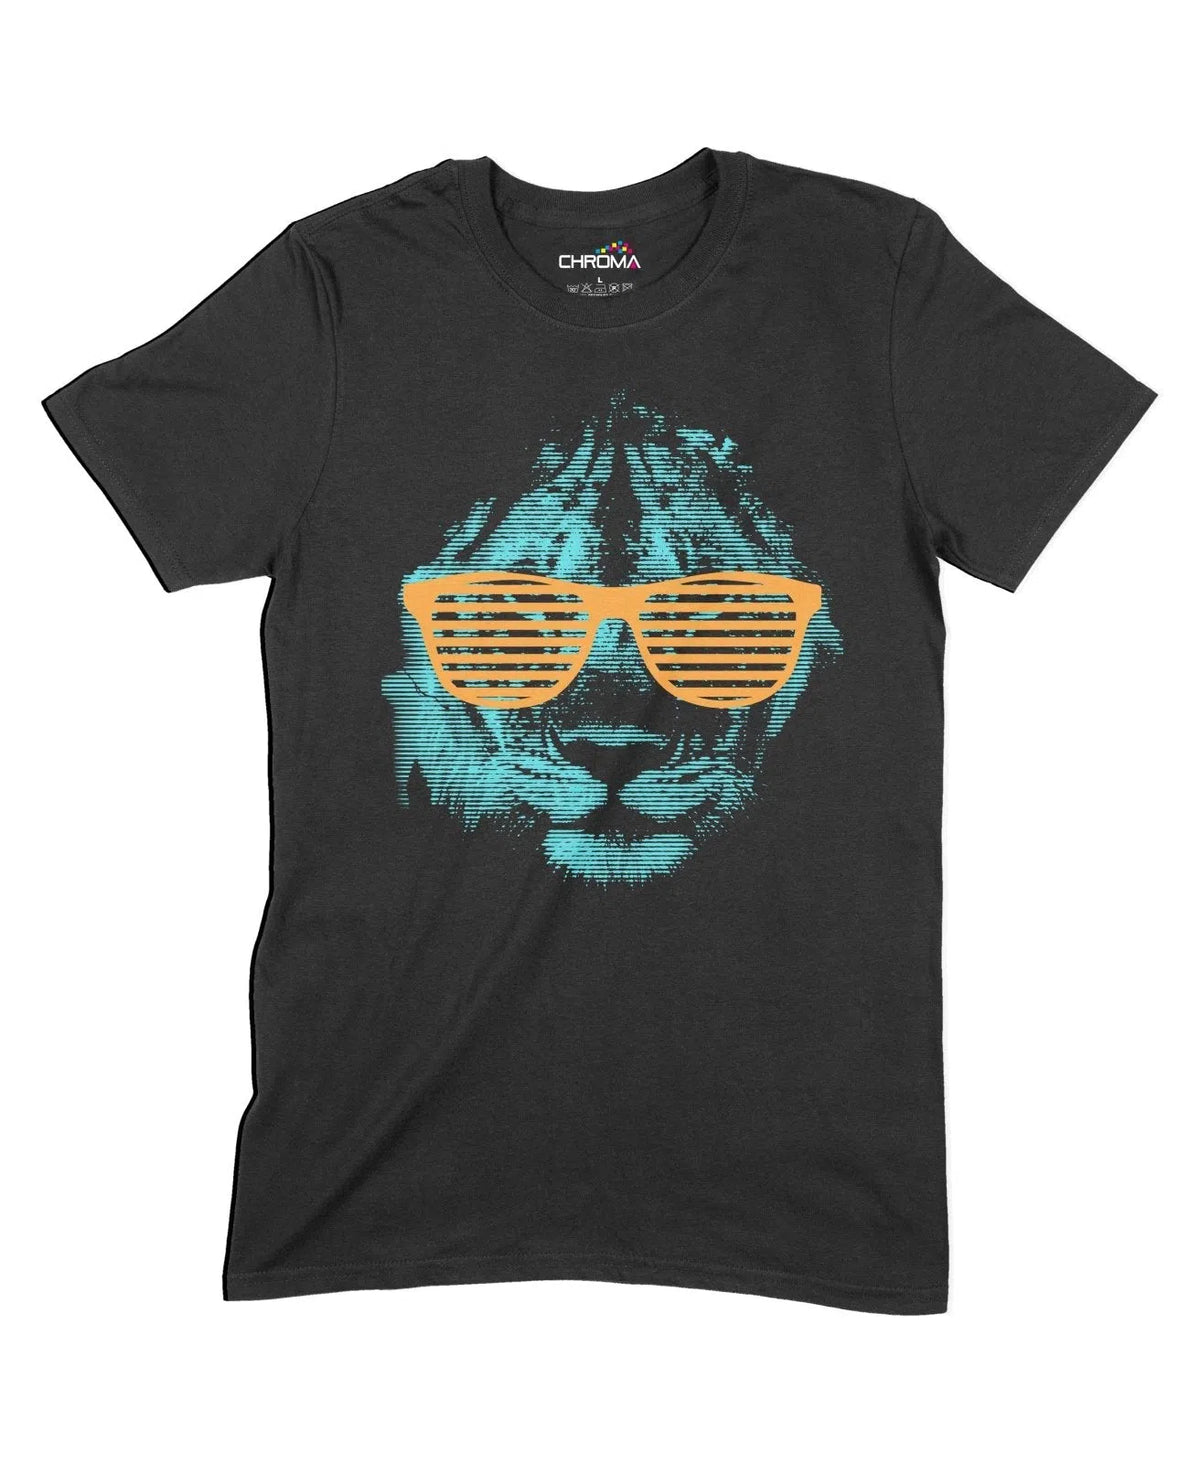 This Cool Lion Unisex Adult T-Shirt Chroma Clothing